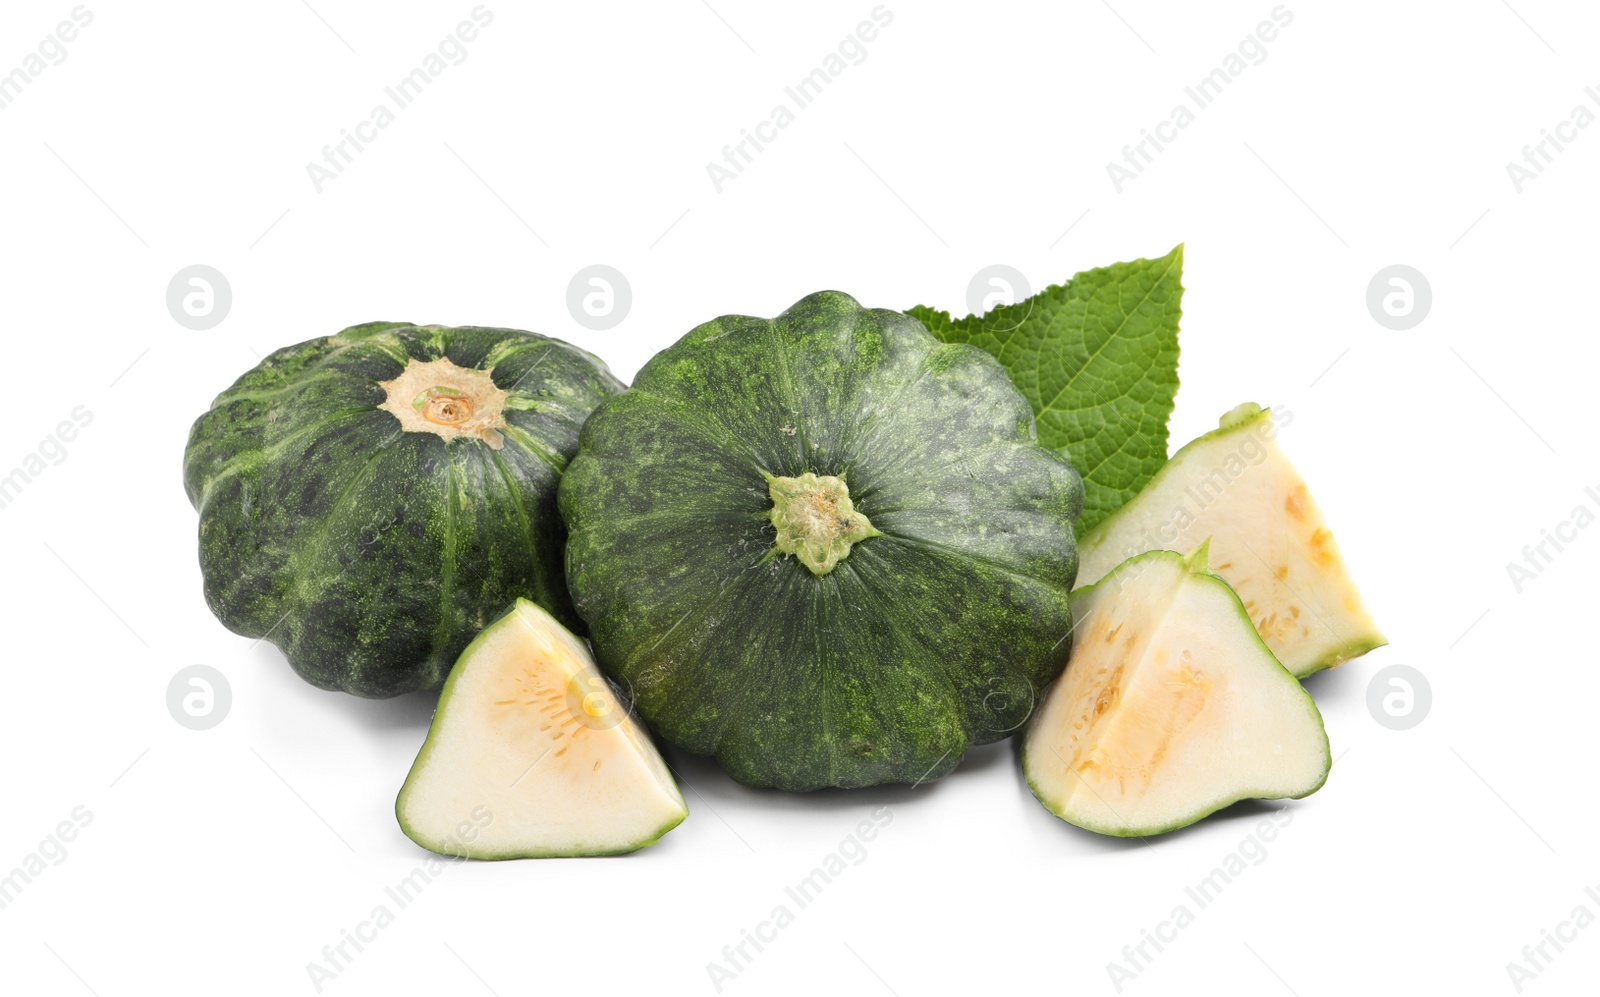 Photo of Whole and cut green pattypan squashes with leaf on white background